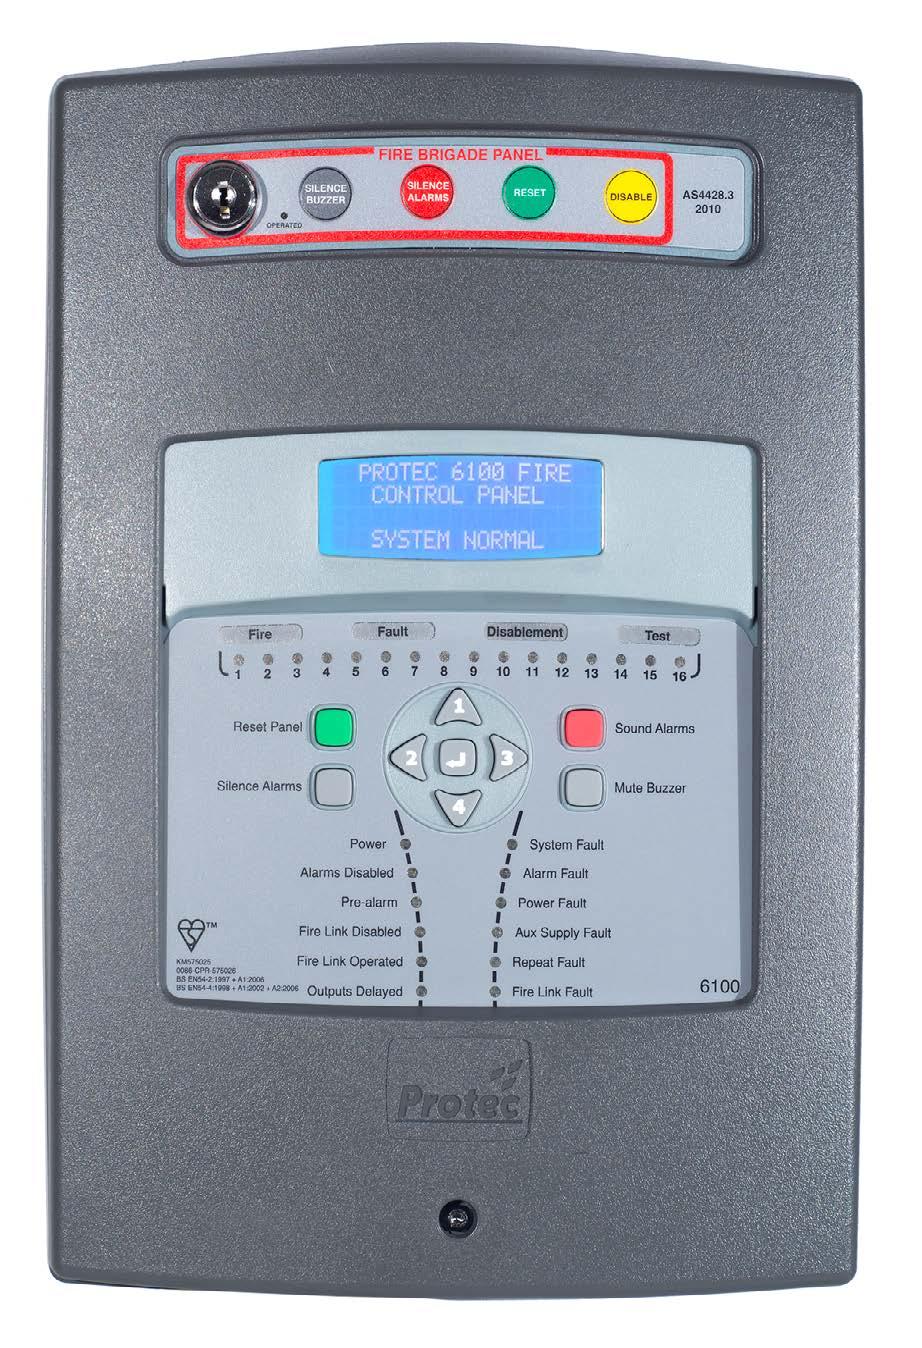 System Features The Protec Algo-Tec TM 6100 is an interactive digital addressable fire detection and alarm system ideally suited for small and medium sized buildings such as shops, hotels and offices.